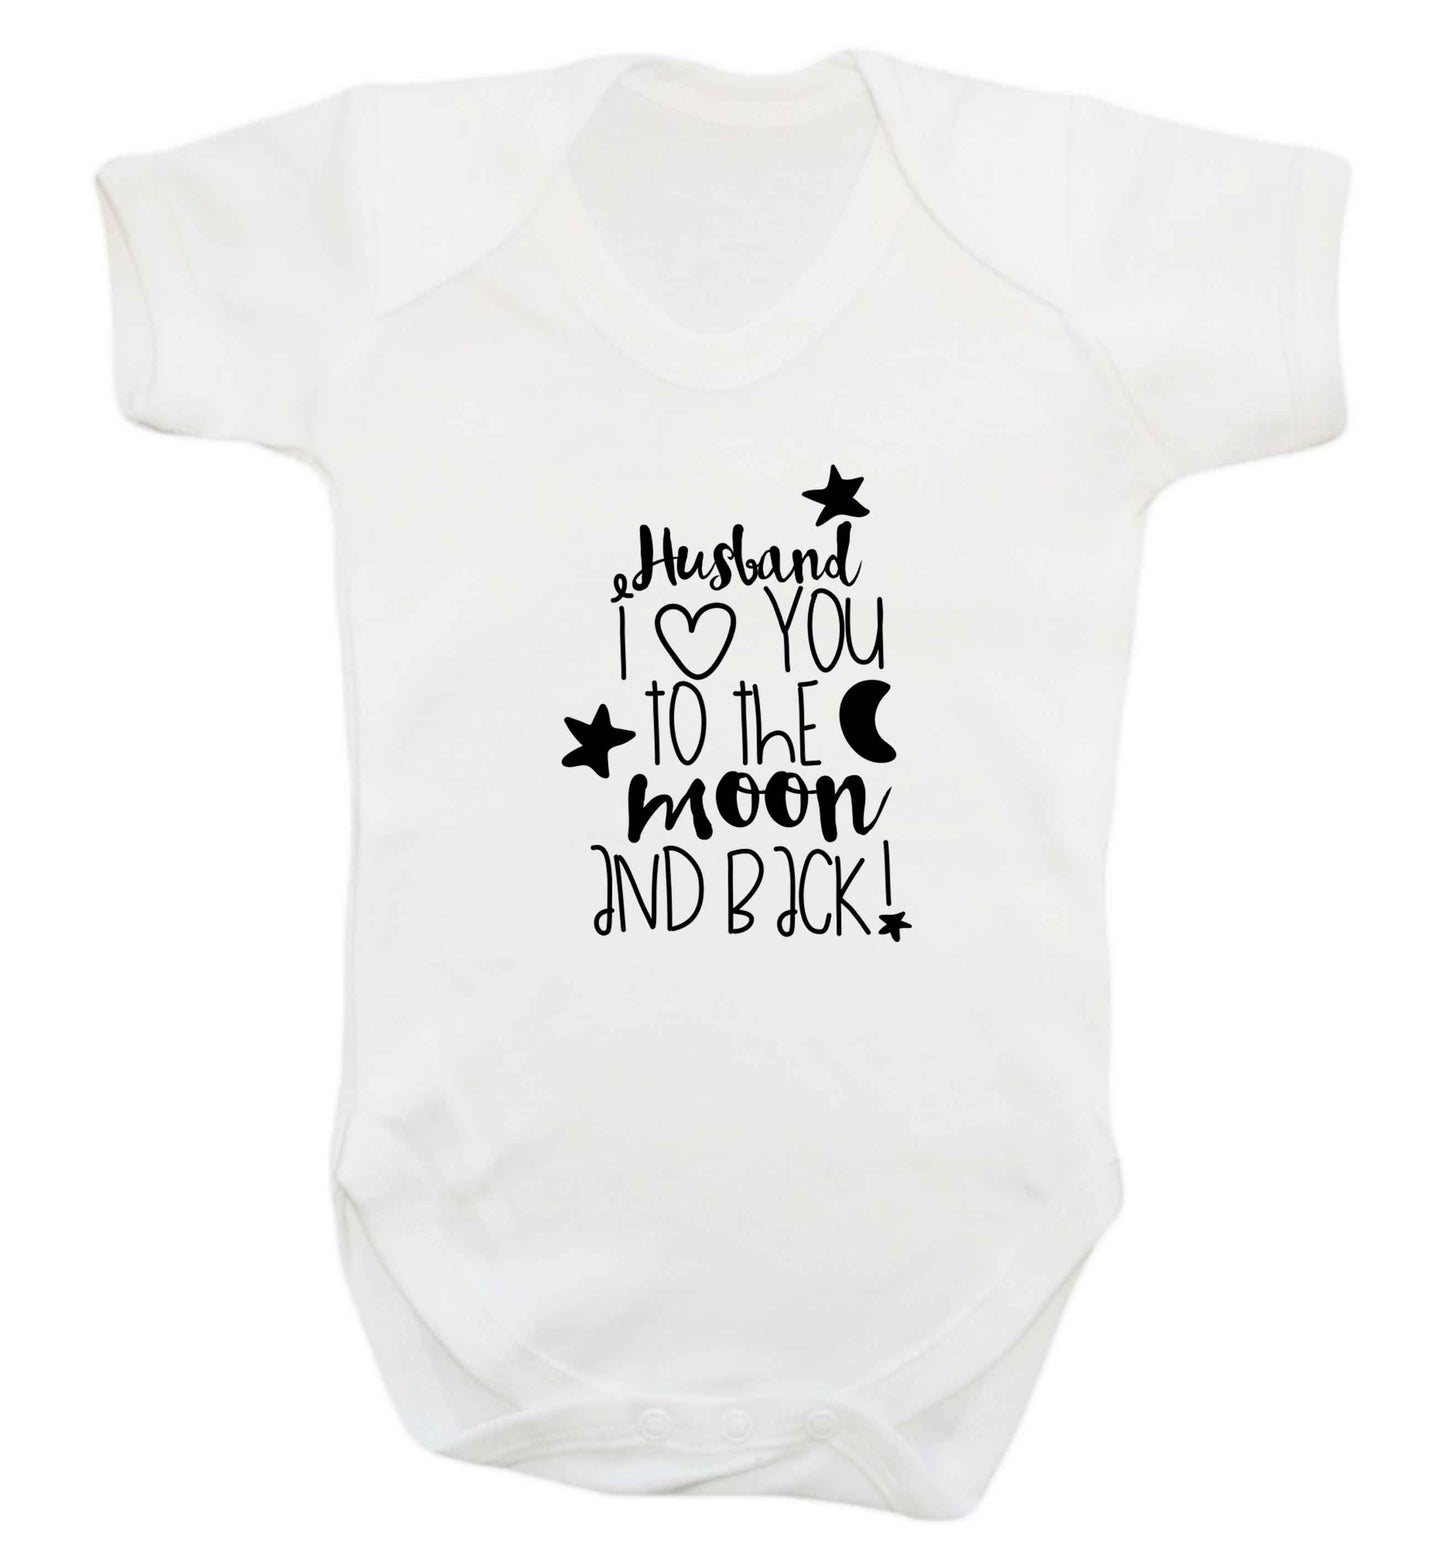 Husband I love you to the moon and back baby vest white 18-24 months